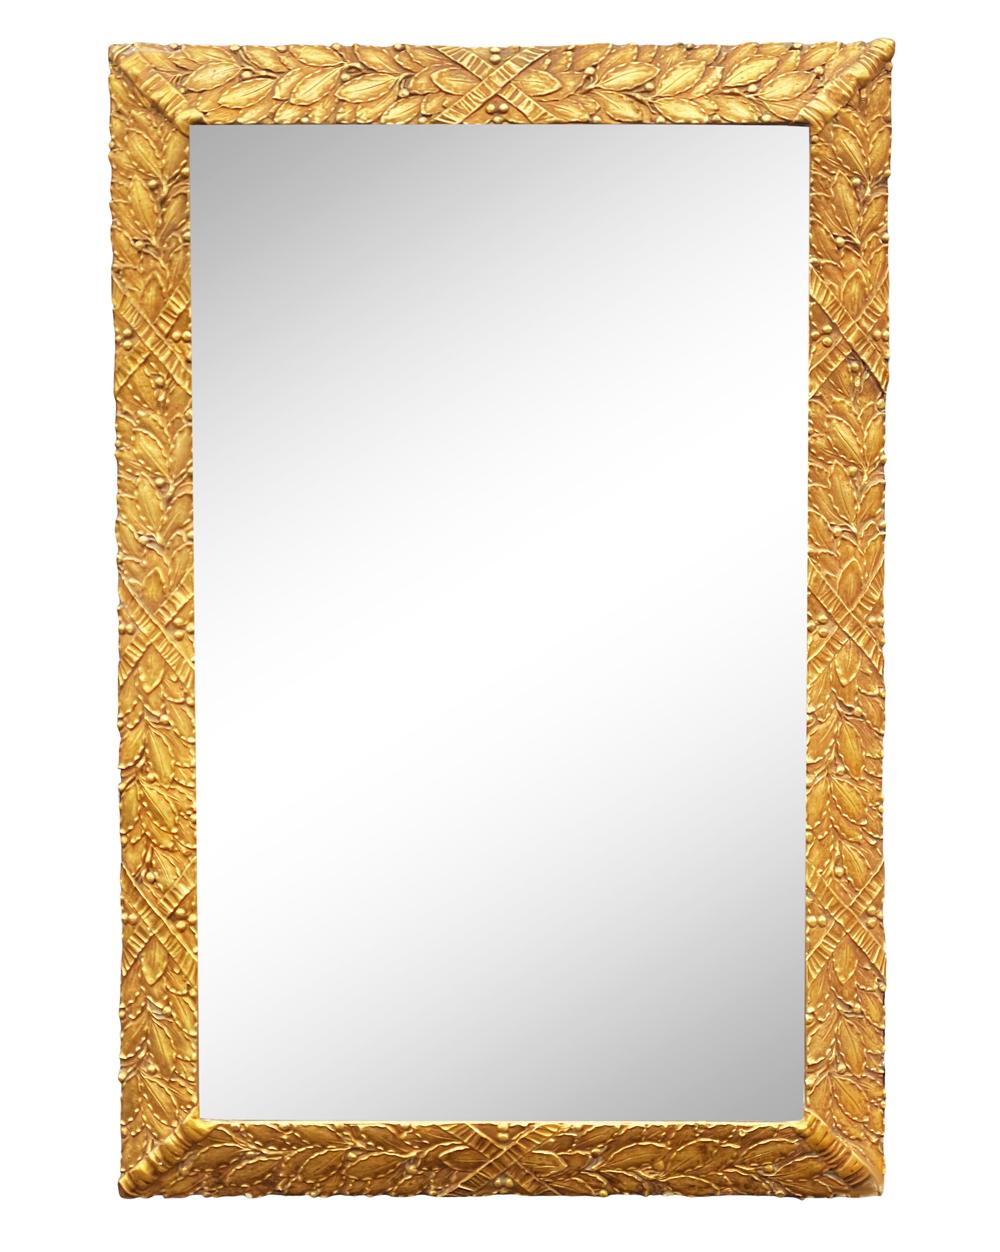 Hollywood Regency Large Italian Rectangular Mirror in Gold Gilded Carved Wood For Sale 1